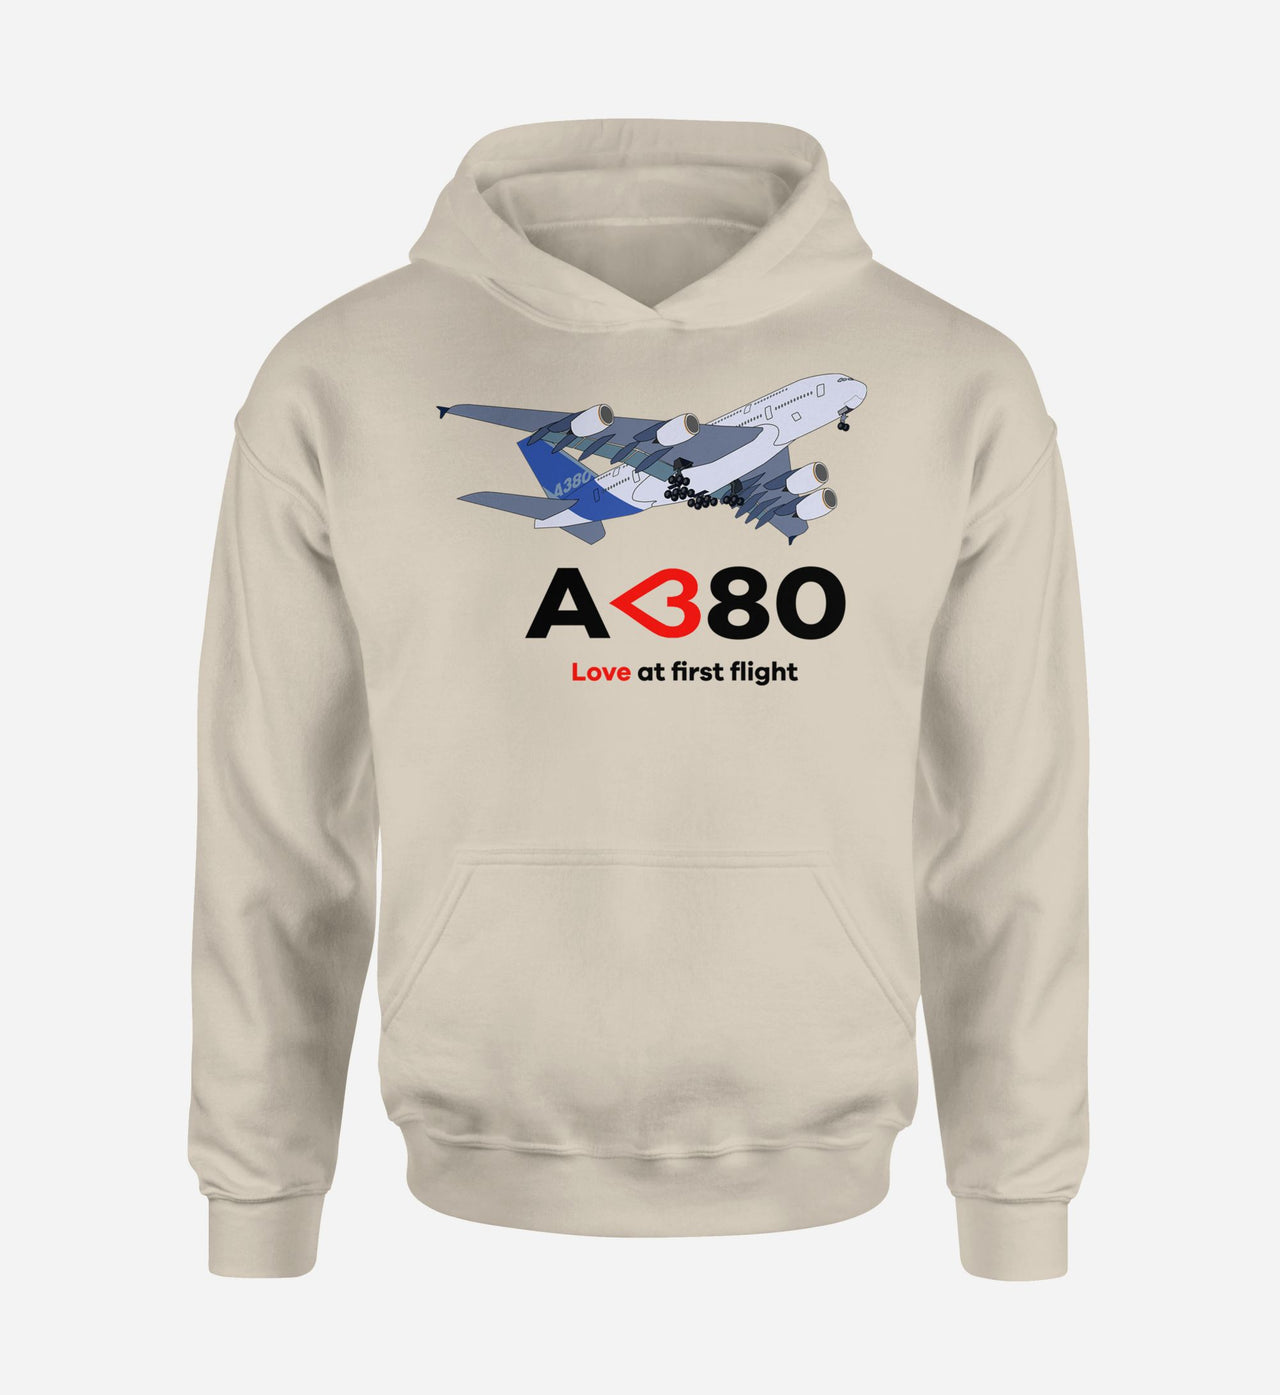 Airbus A380 Love at first flight Designed Hoodies